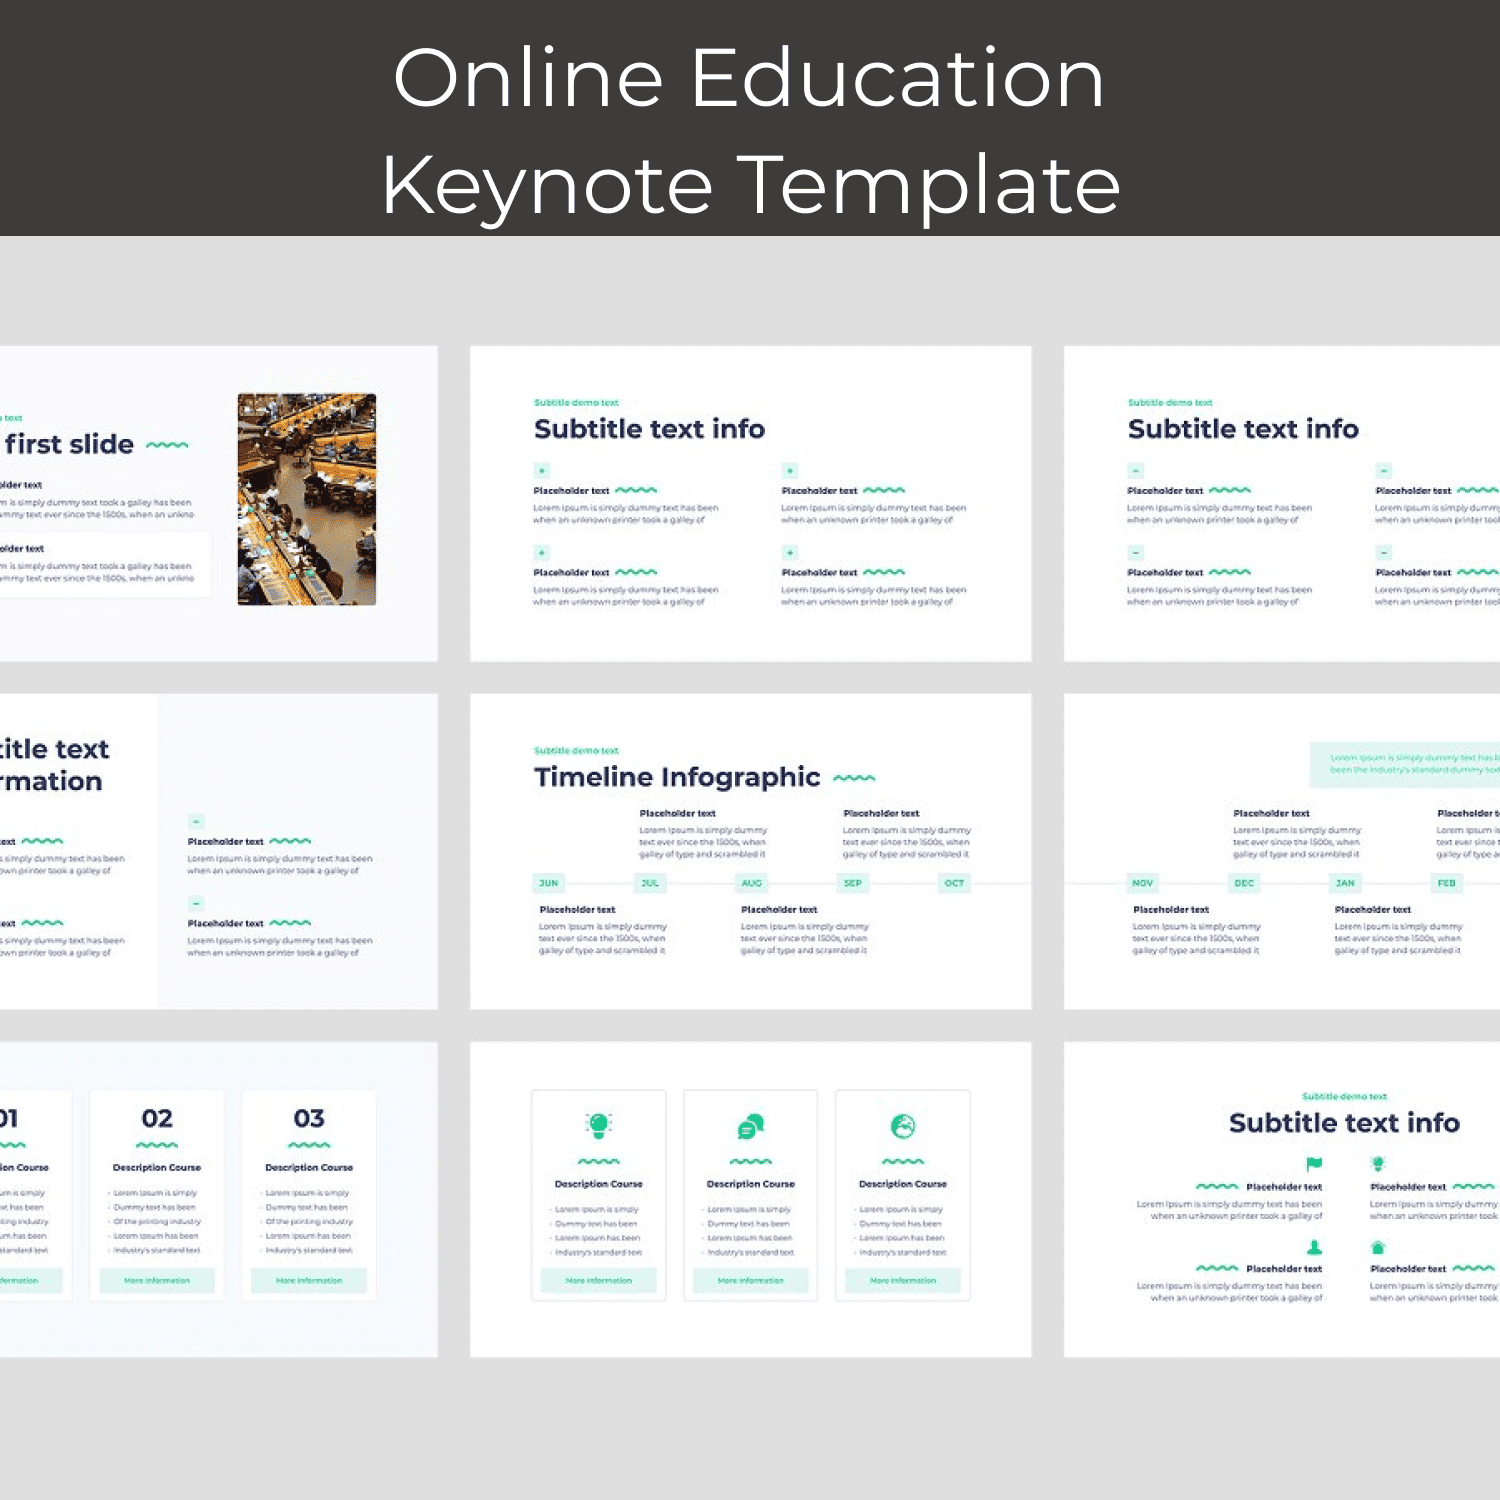 Online Education Keynote Template cover.